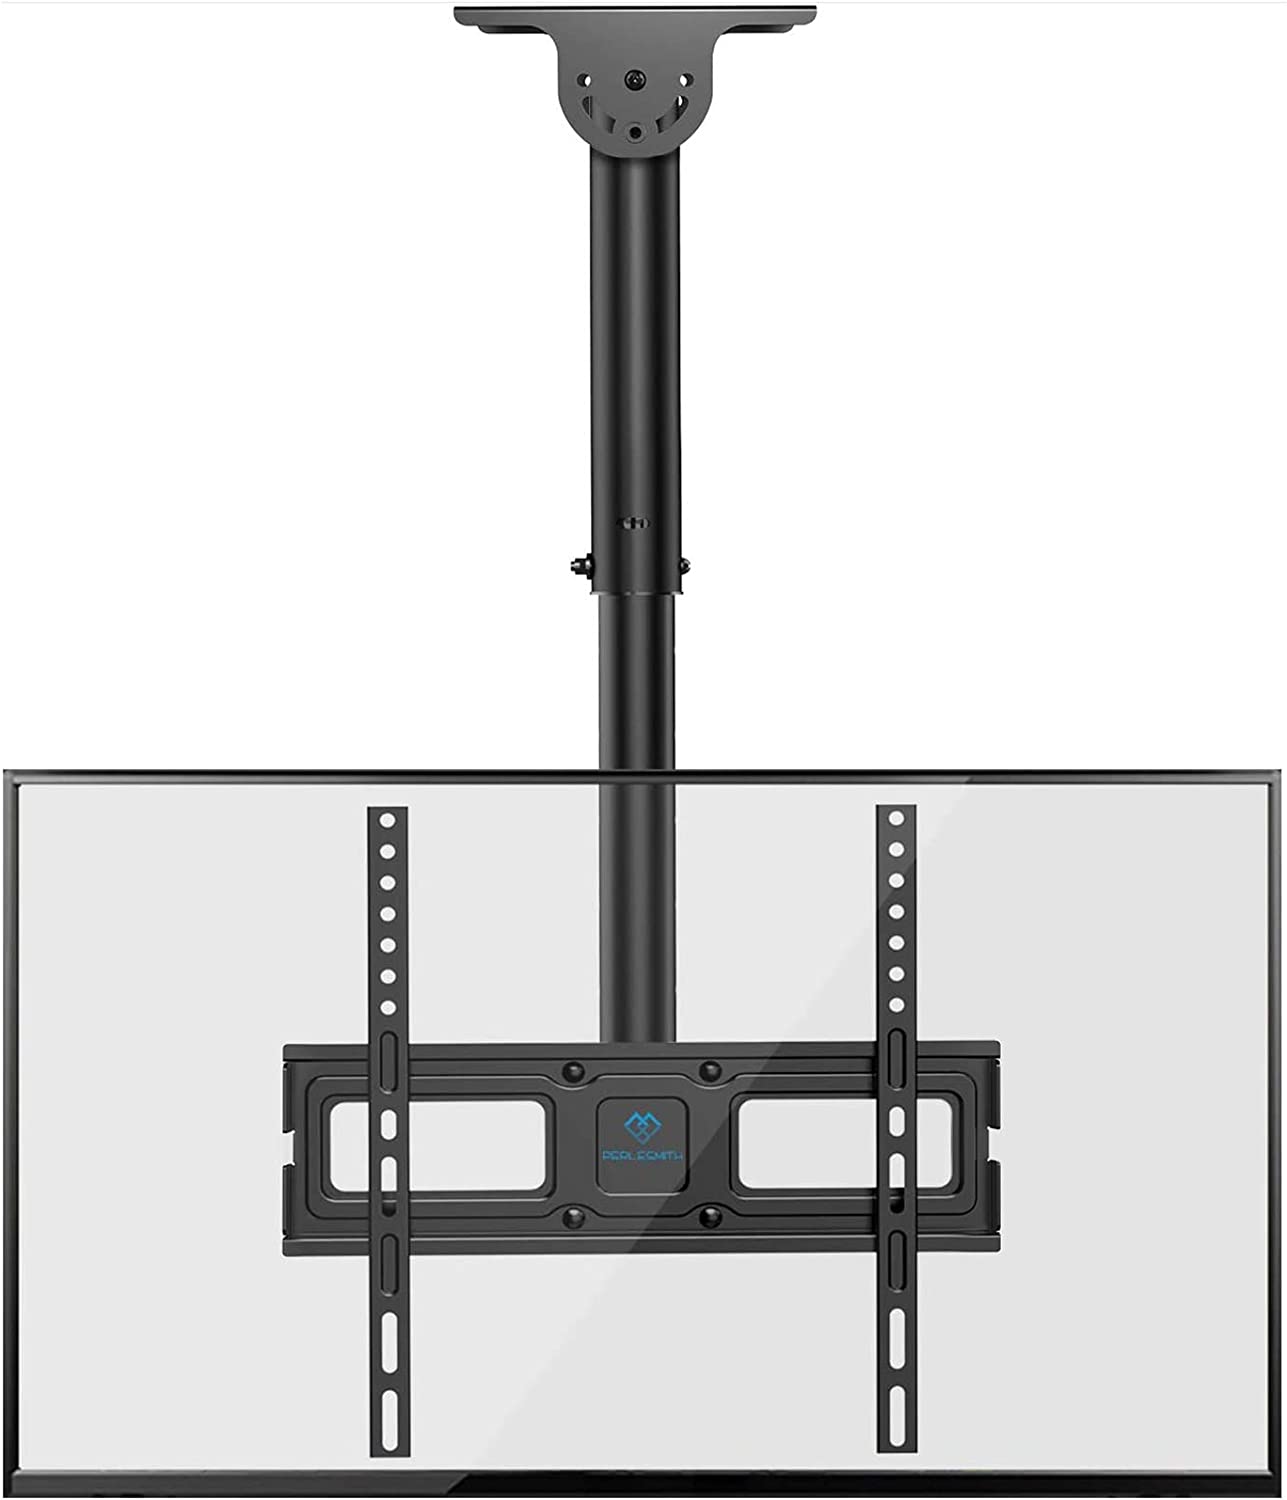 Perlesmith Hanging Full-Motion Ceiling TV Mount (For 26''-65'' TVs, up to 110-lbs) $19.35 + Free Shipping